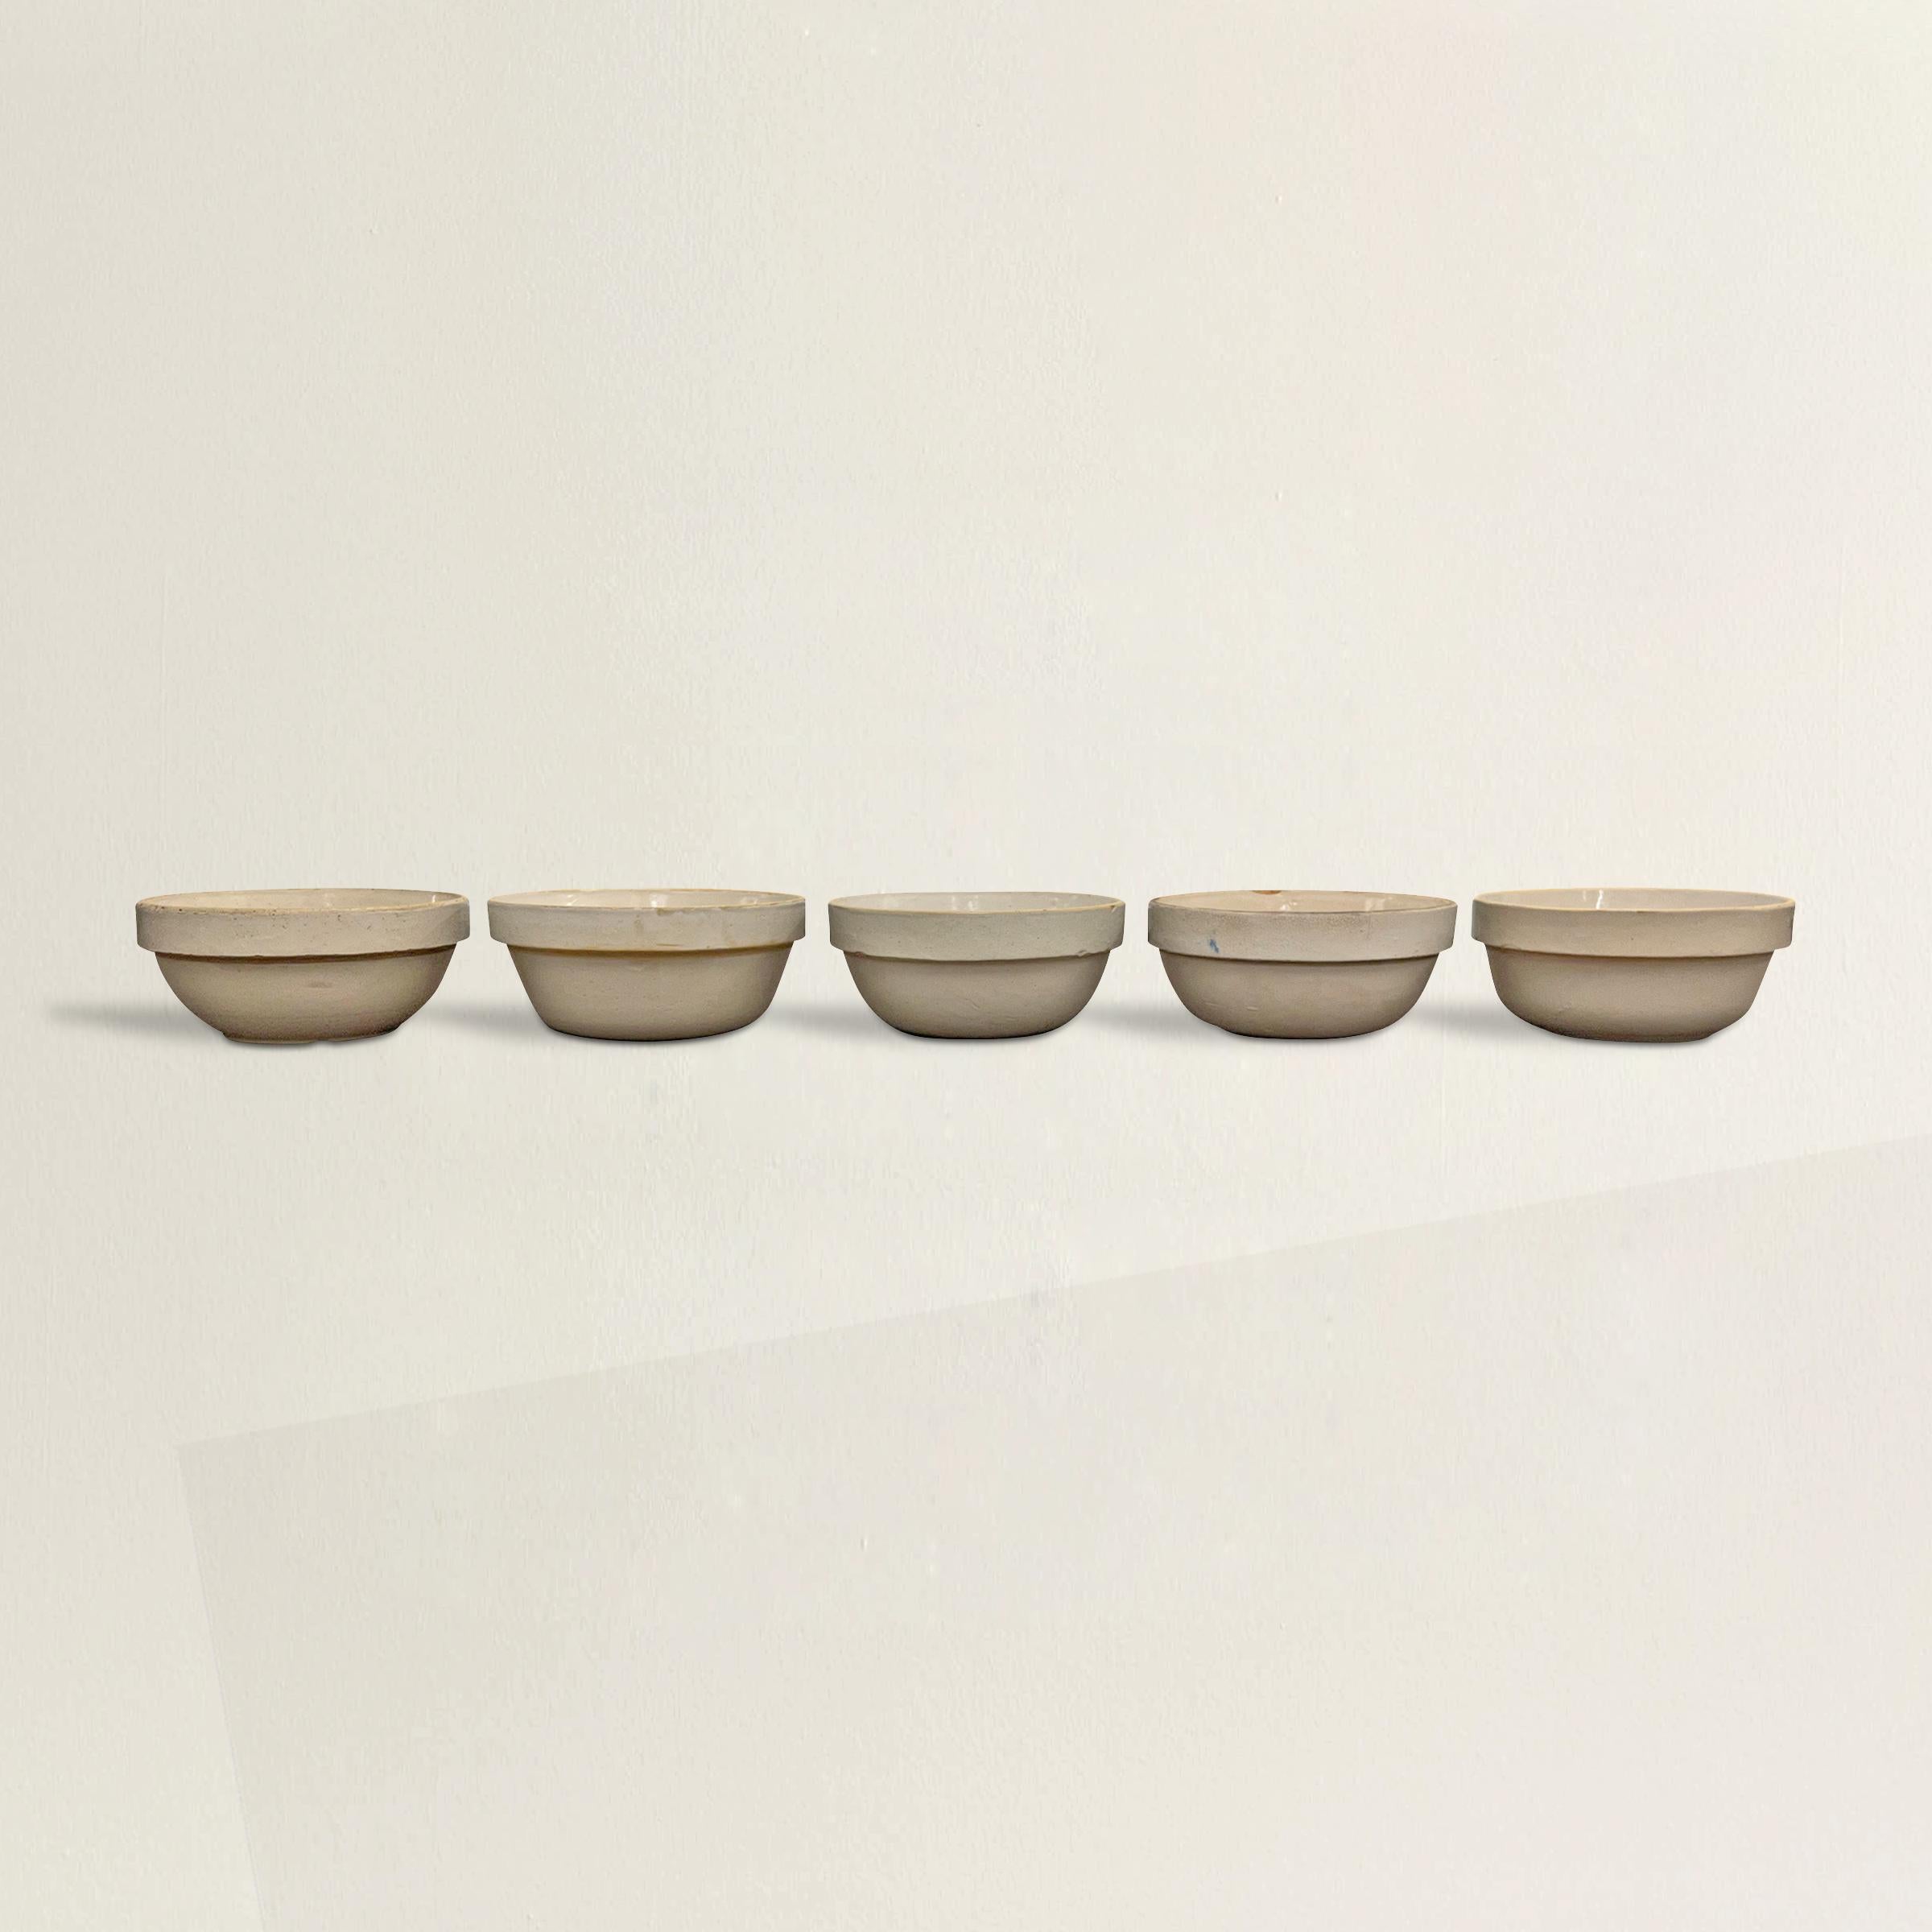 A charming assembled set of five early 20th century American zinc-glazed stoneware mixing bowls of simple, but sophisticated, forms and a blend of similar cream colors. Perfect for displaying on your kitchen shelves, lined up on your counters, or